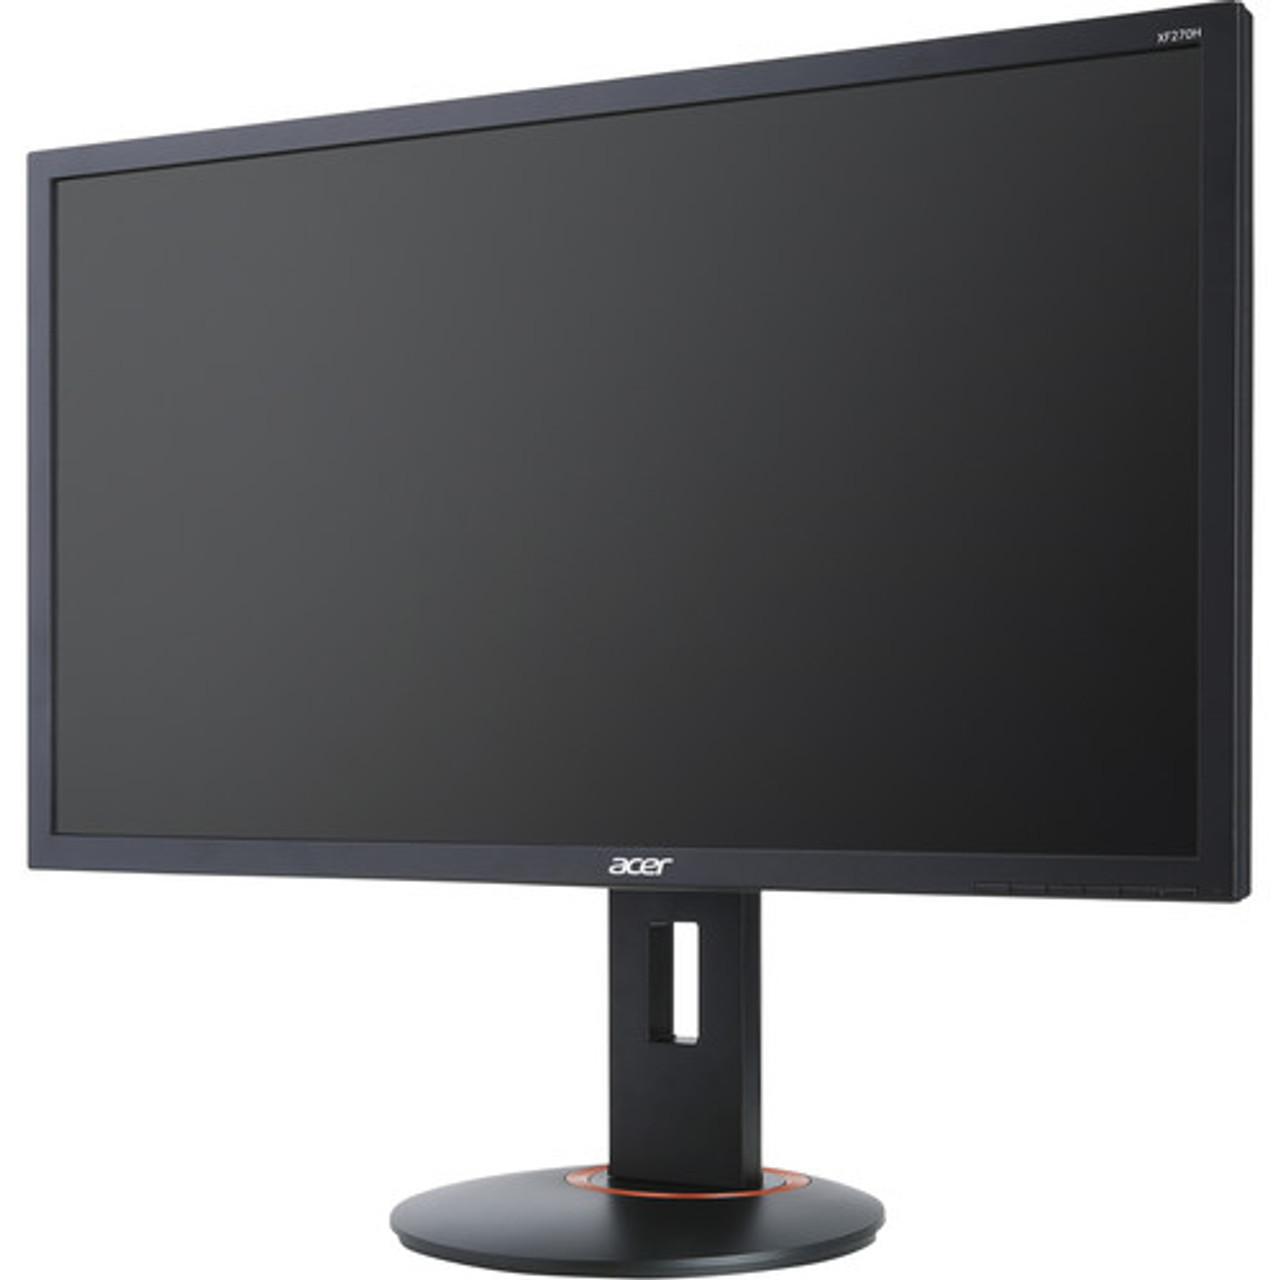 Acer Xf 245 Widescreen Monitor Display 1920x1080 1ms Gtg 169 Amd